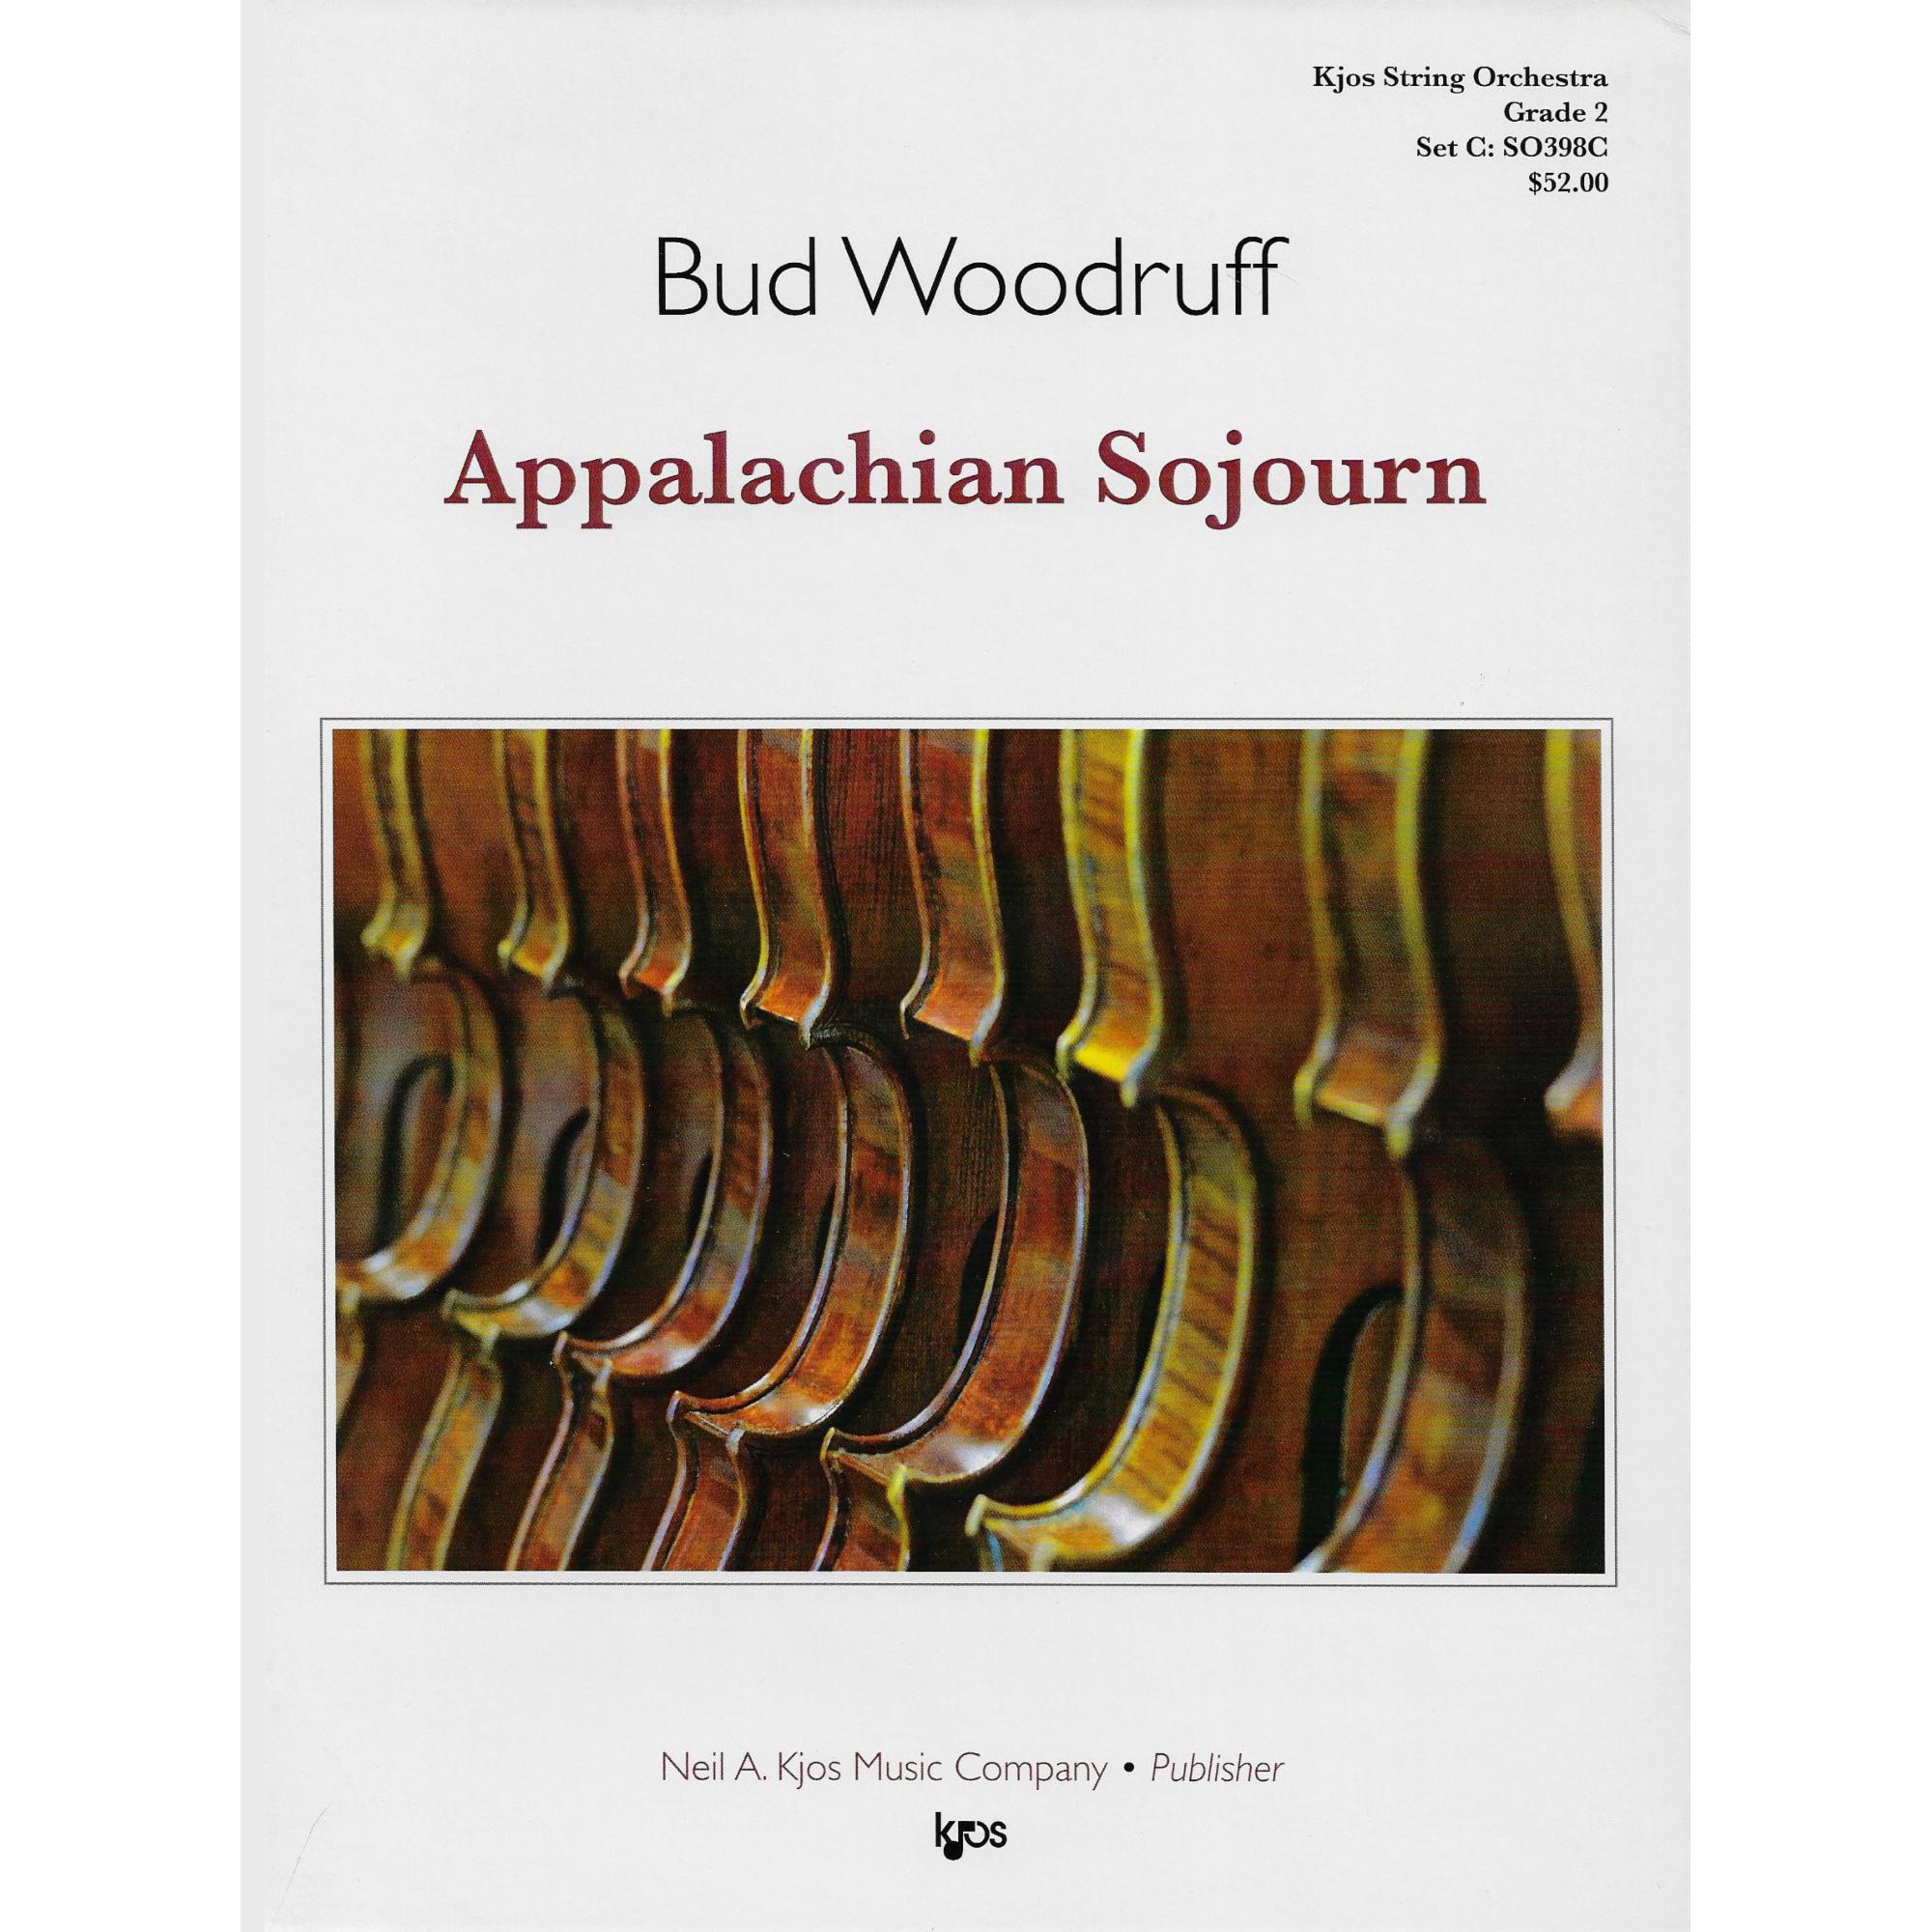 Appalachian Sojourn for String Orchestra